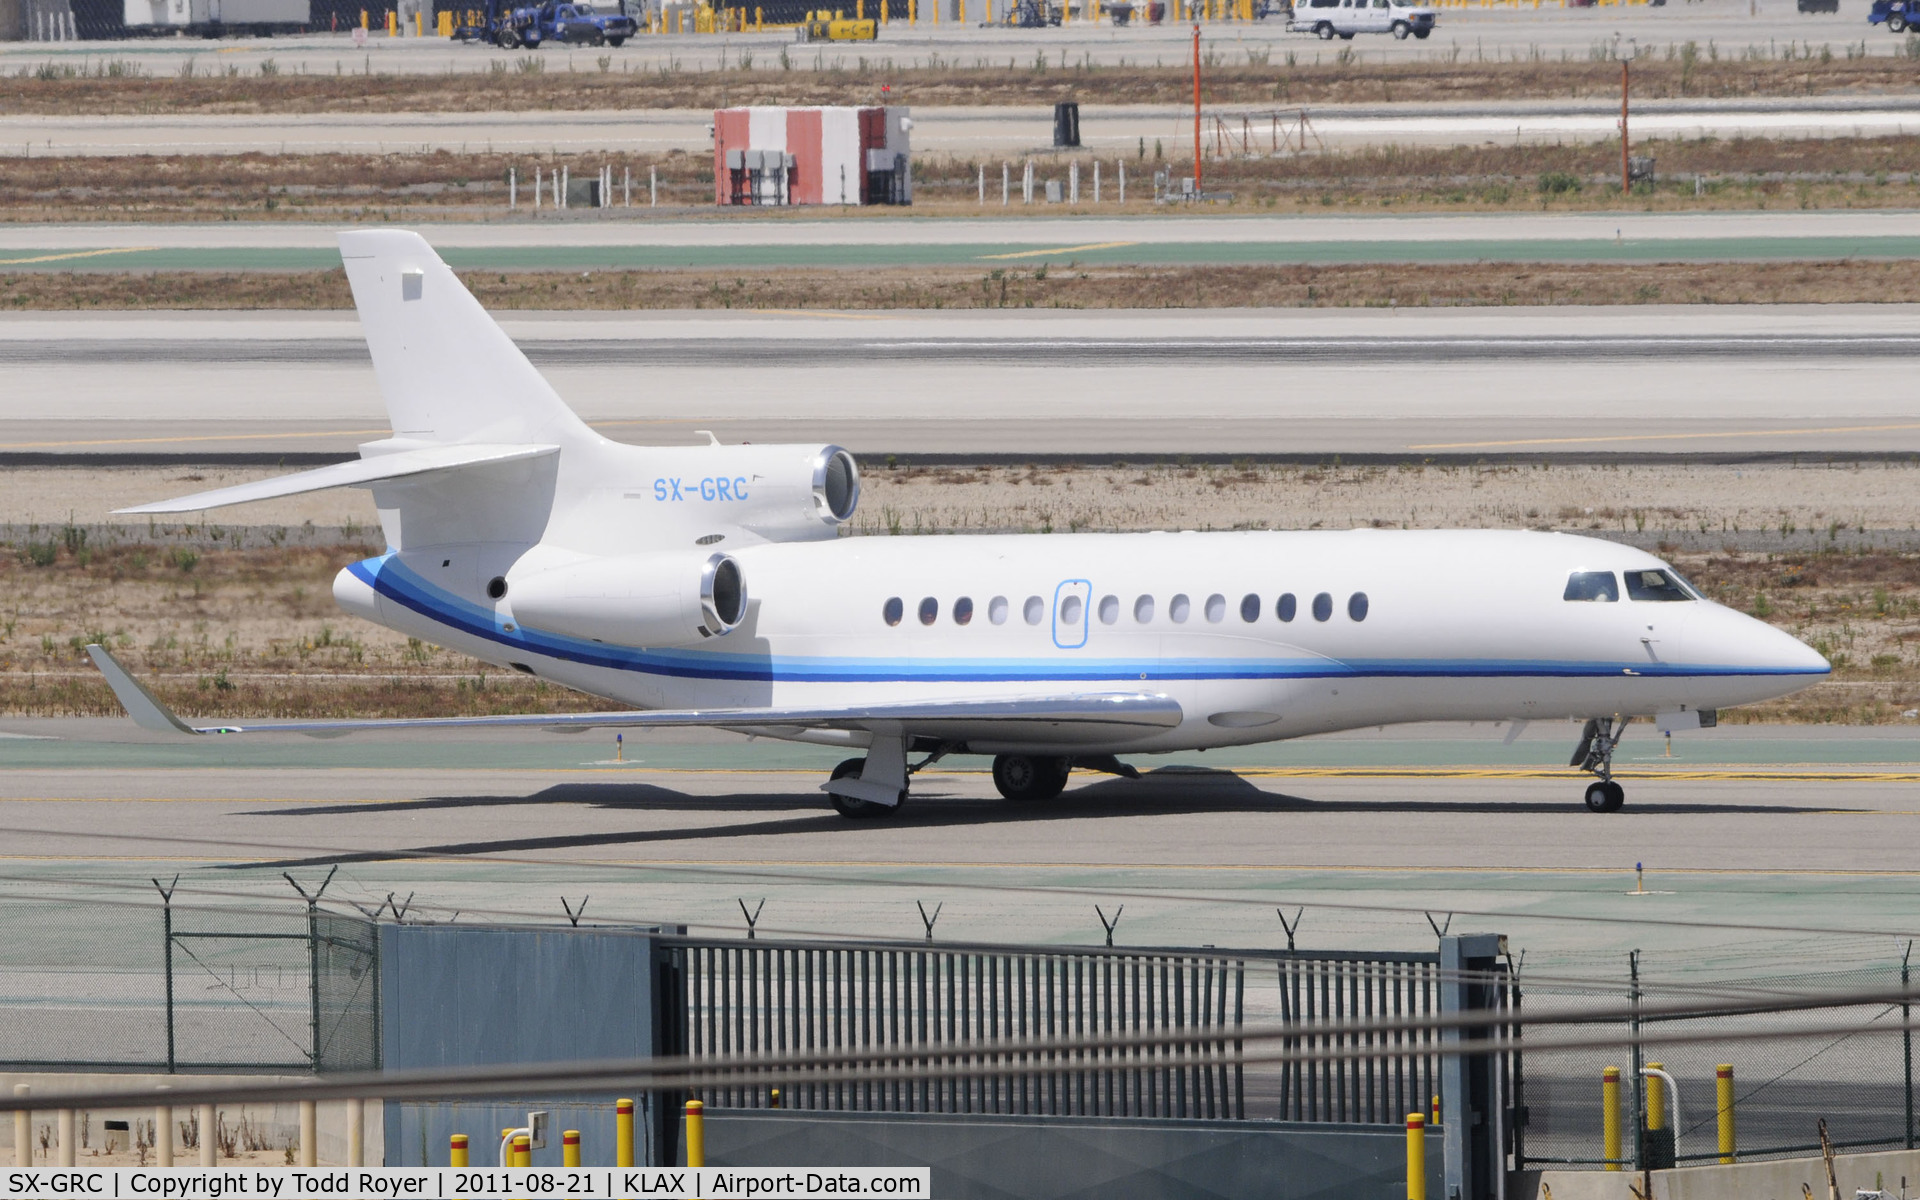 SX-GRC, 2010 Dassault Falcon 7X C/N 109, Taxiing at LAX